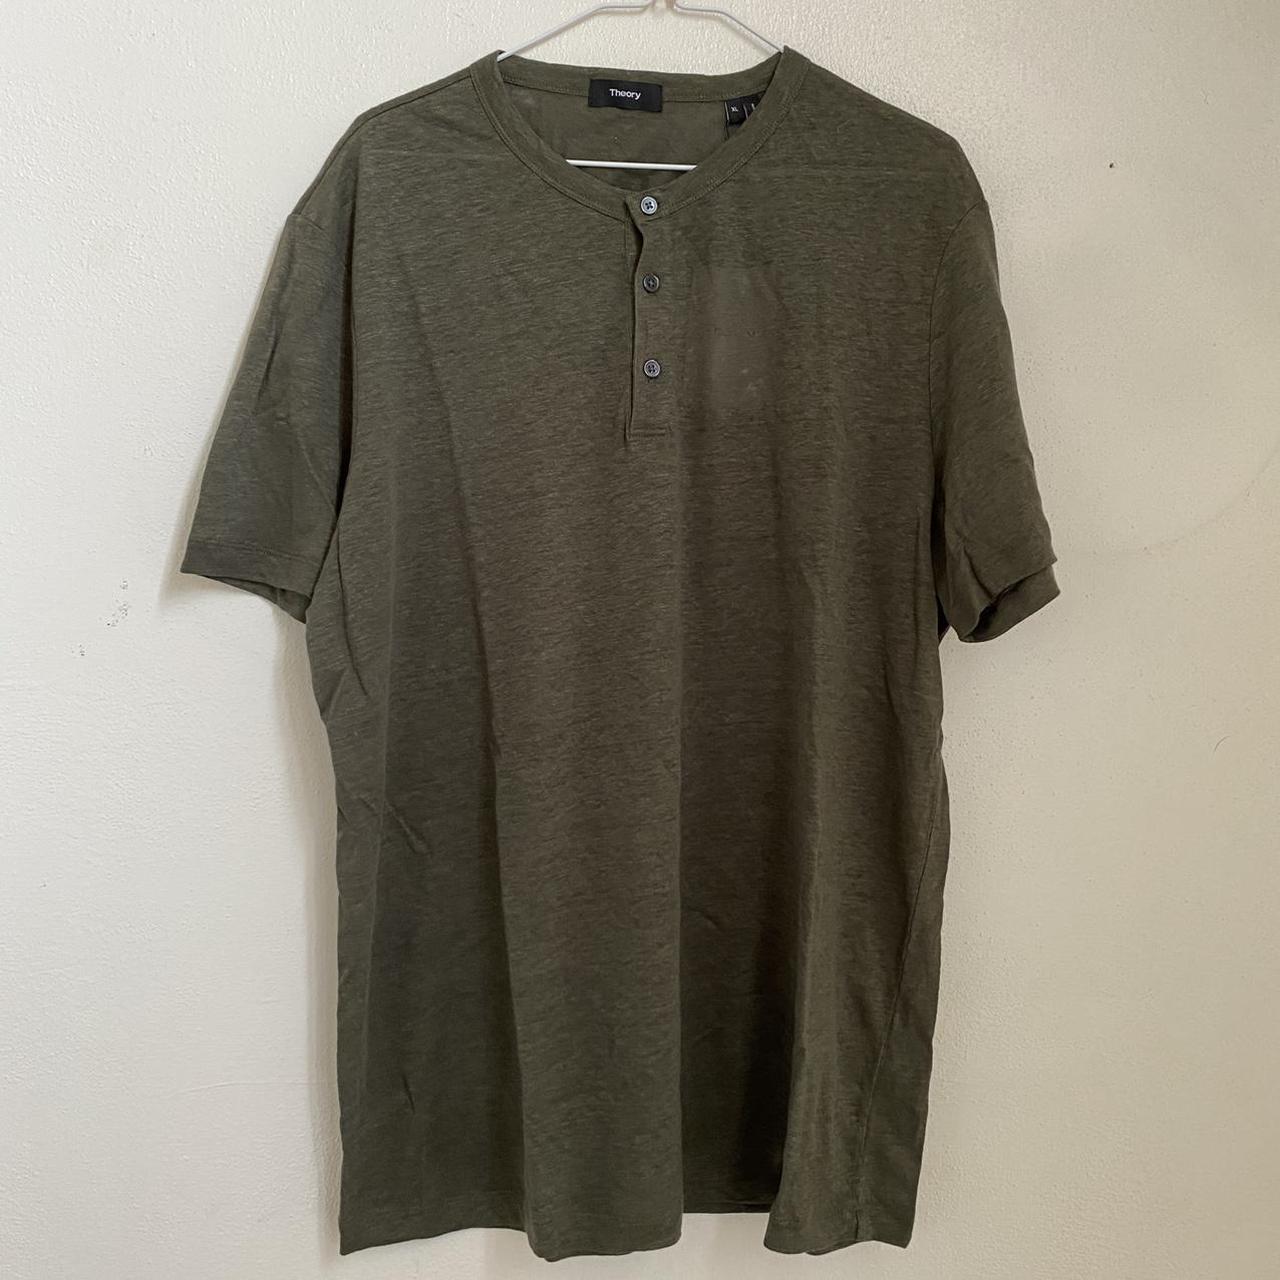 Product Image 1 - Theory- Henley Shirt - brand